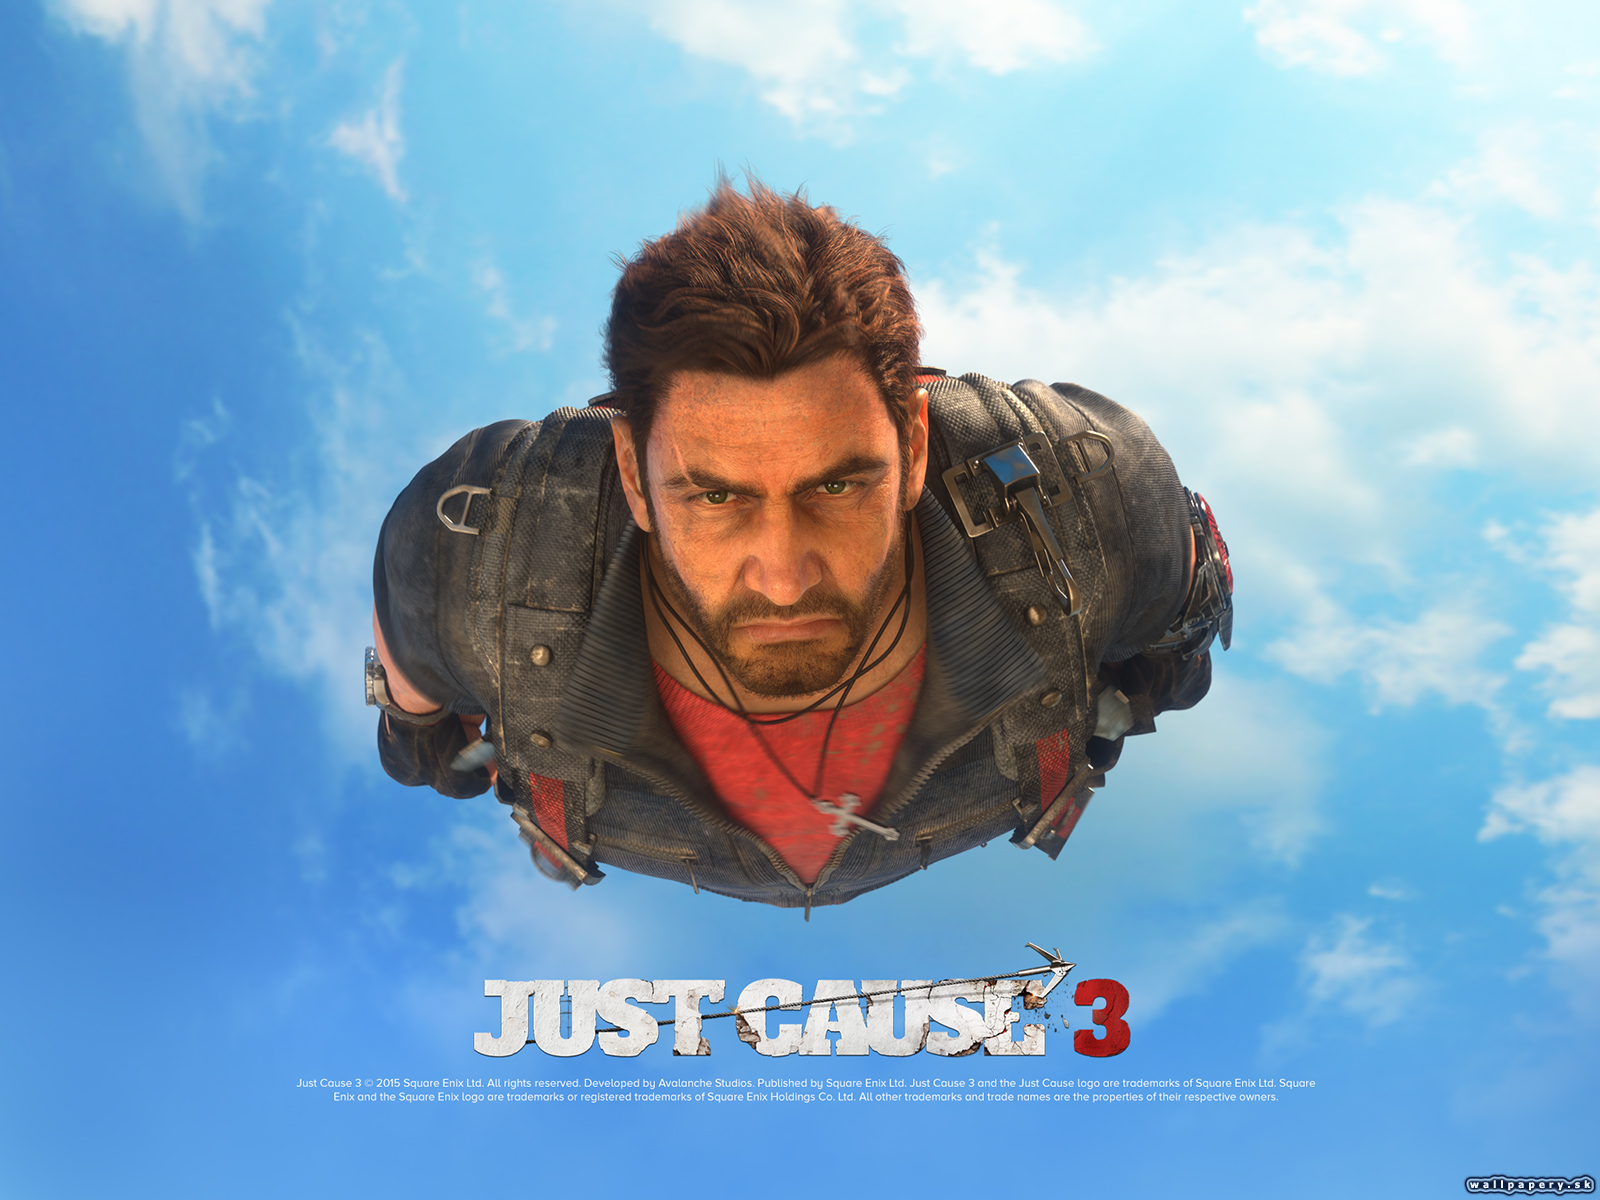 Just Cause 3 - wallpaper 2